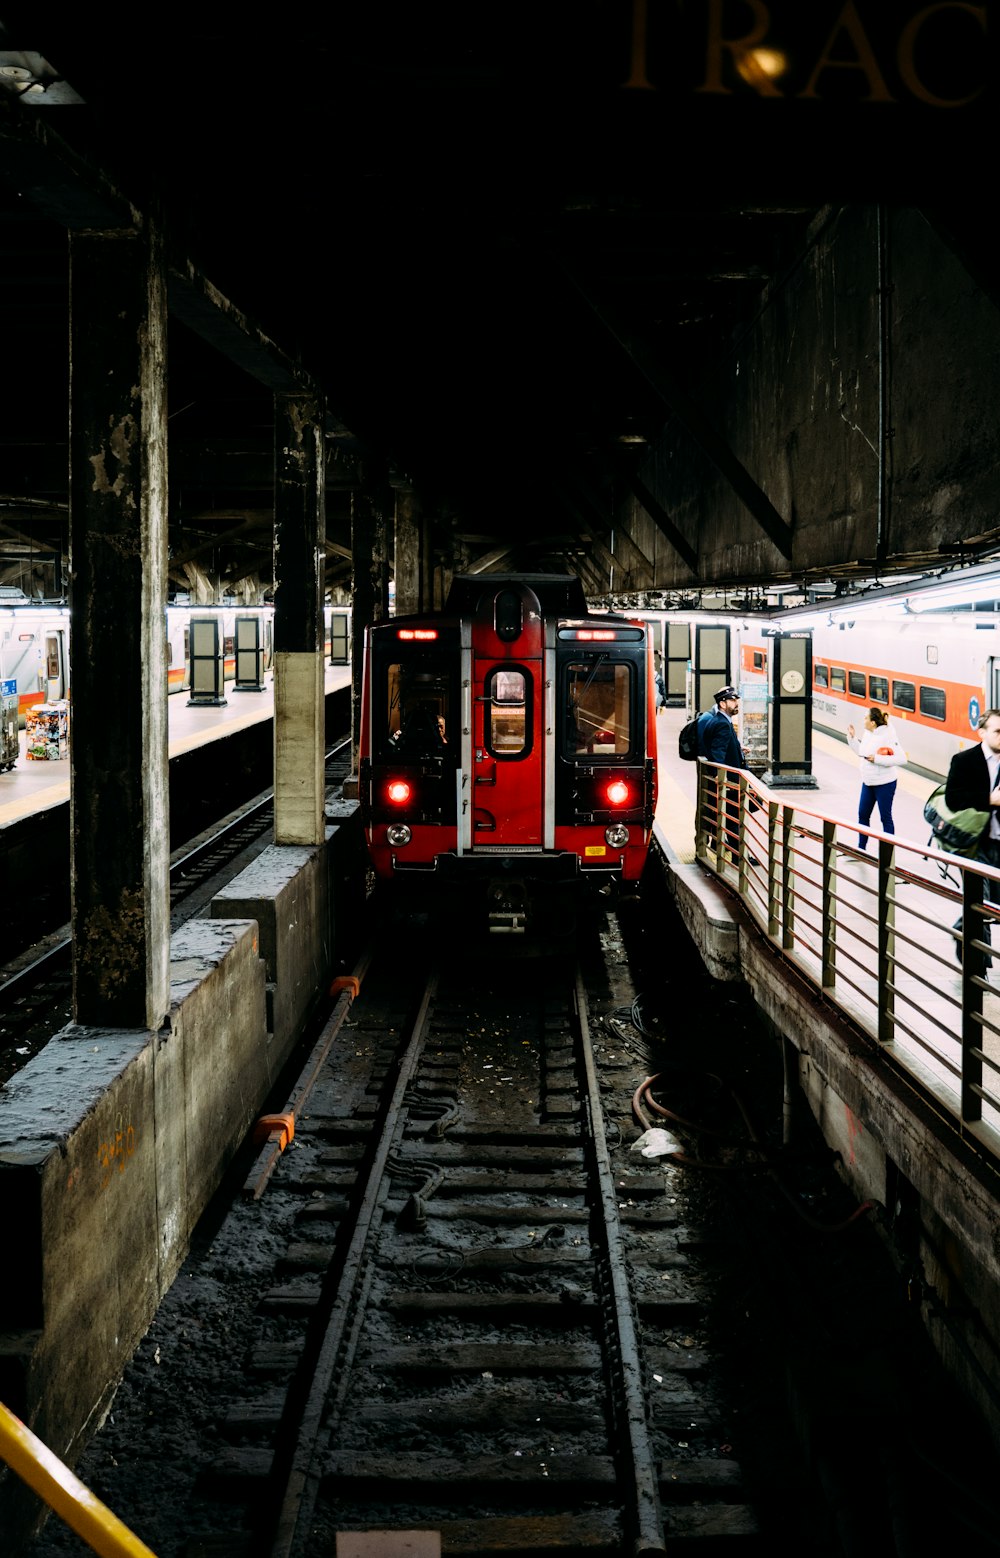 red train in the station